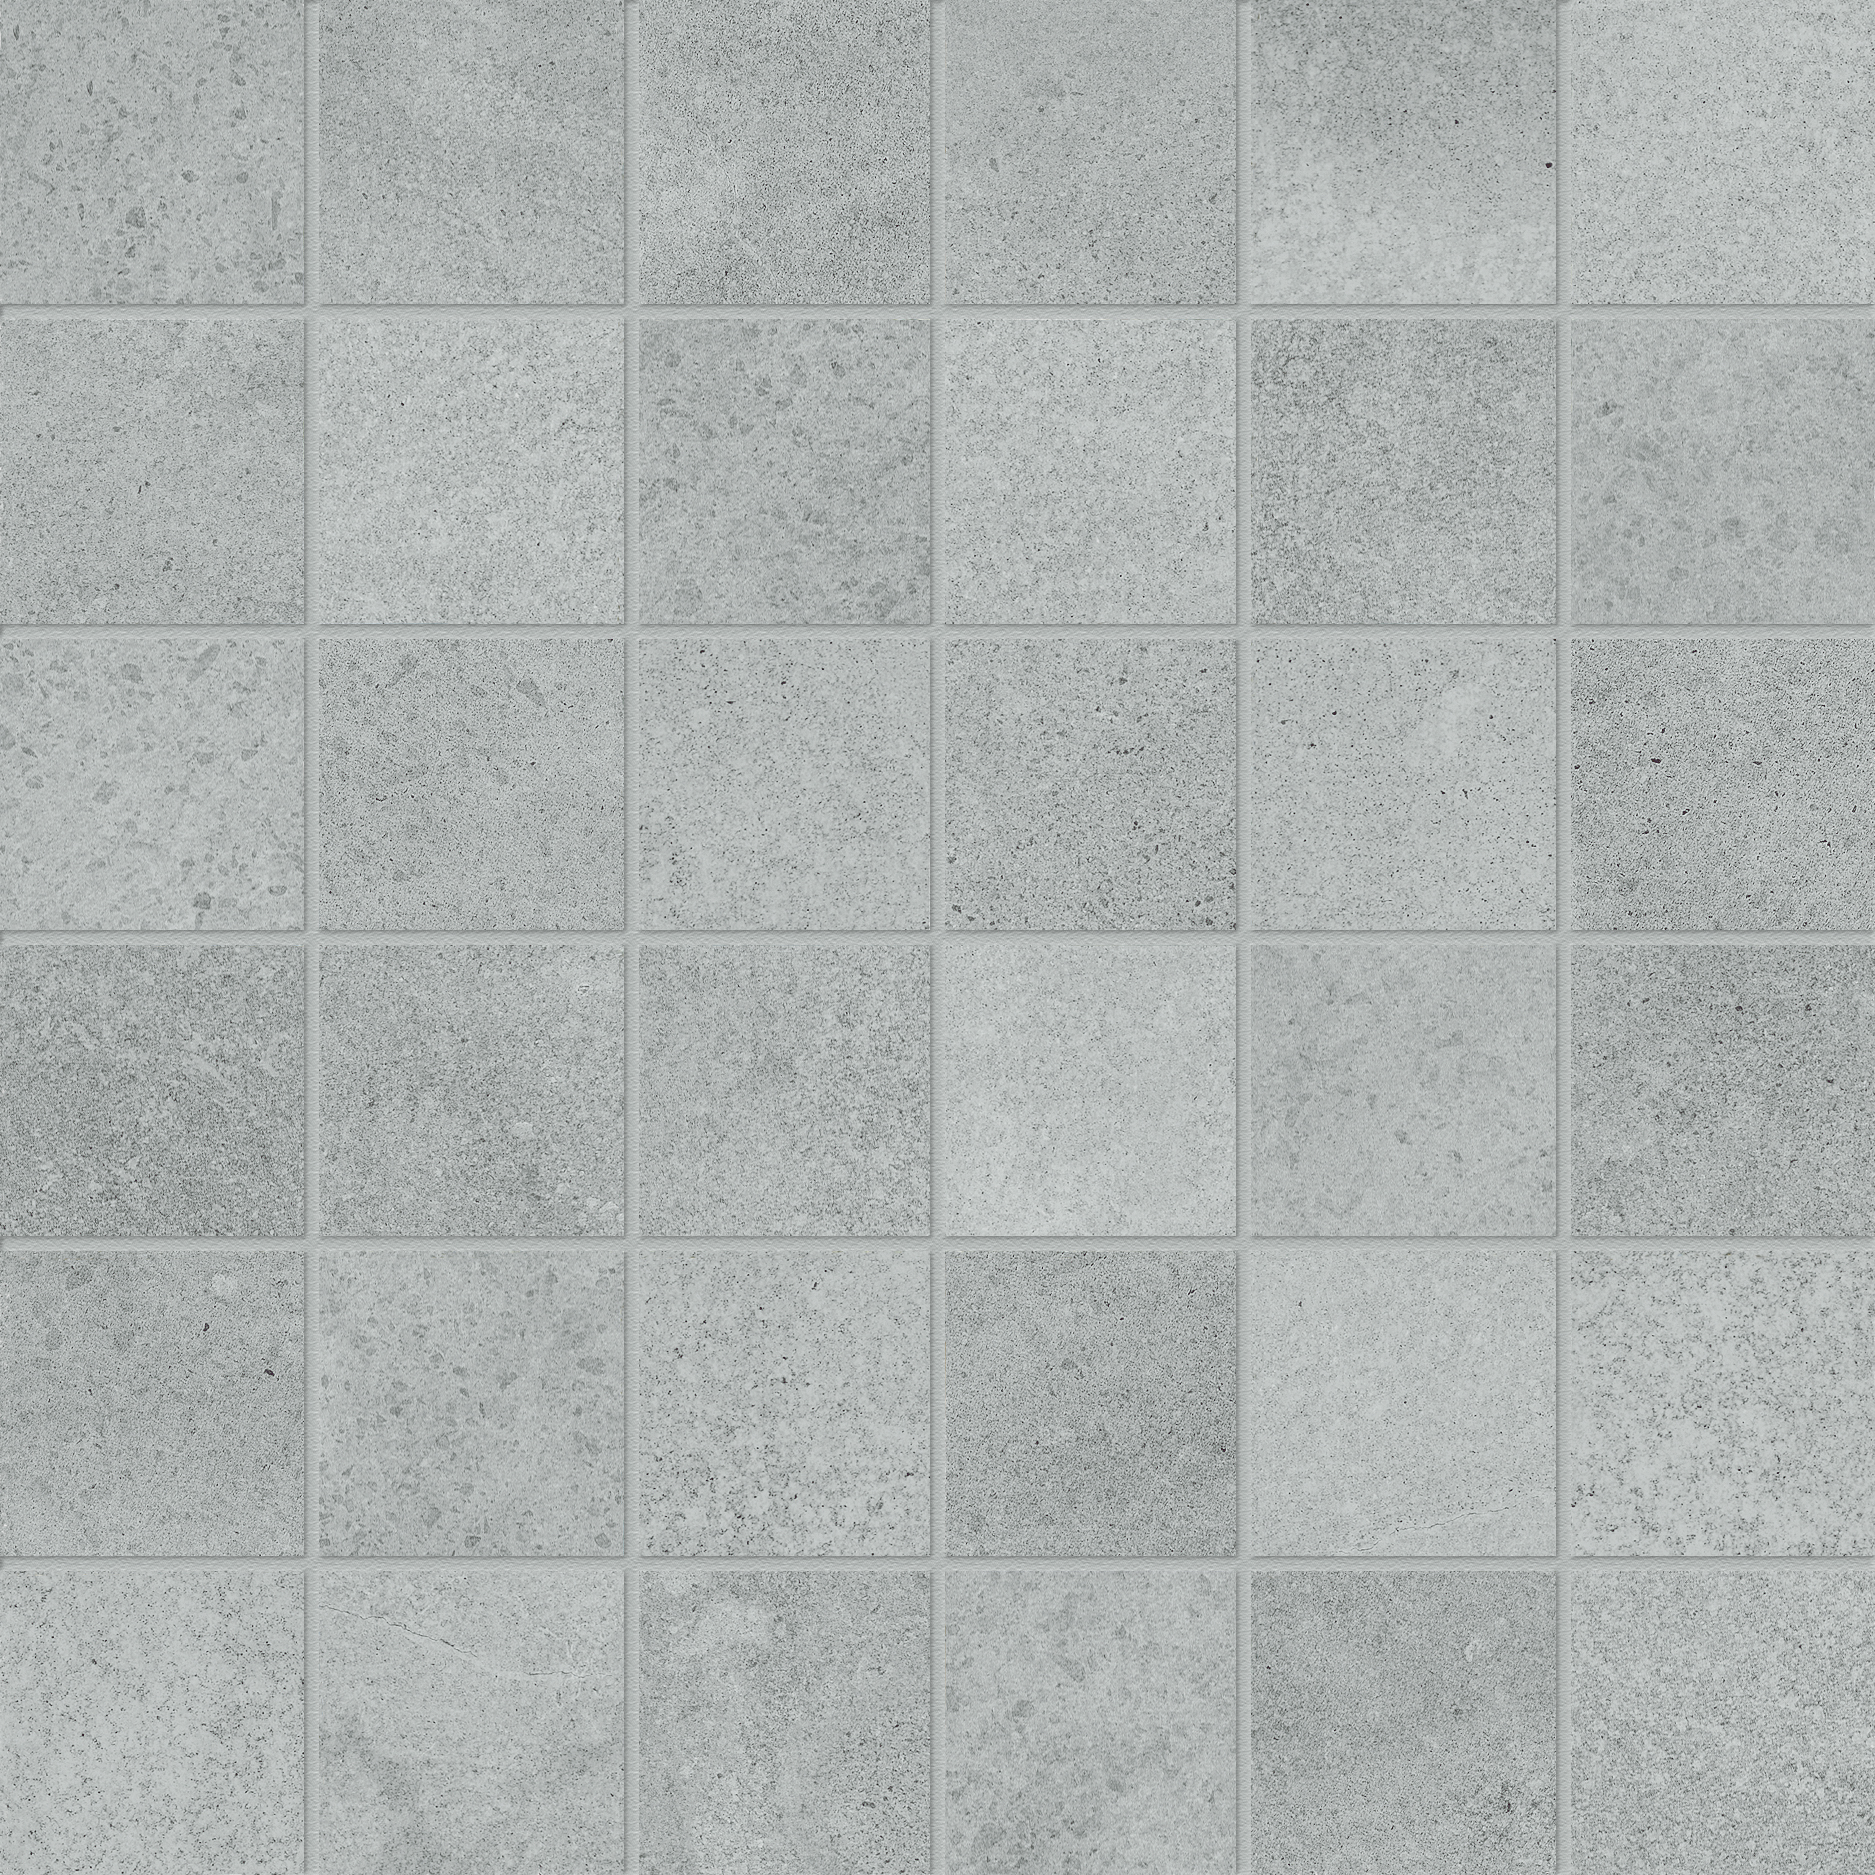 lithium straight stack 2x2-inch pattern color body porcelain mosaic from industria anatolia collection distributed by surface group international matte finish straight edge edge mesh shape